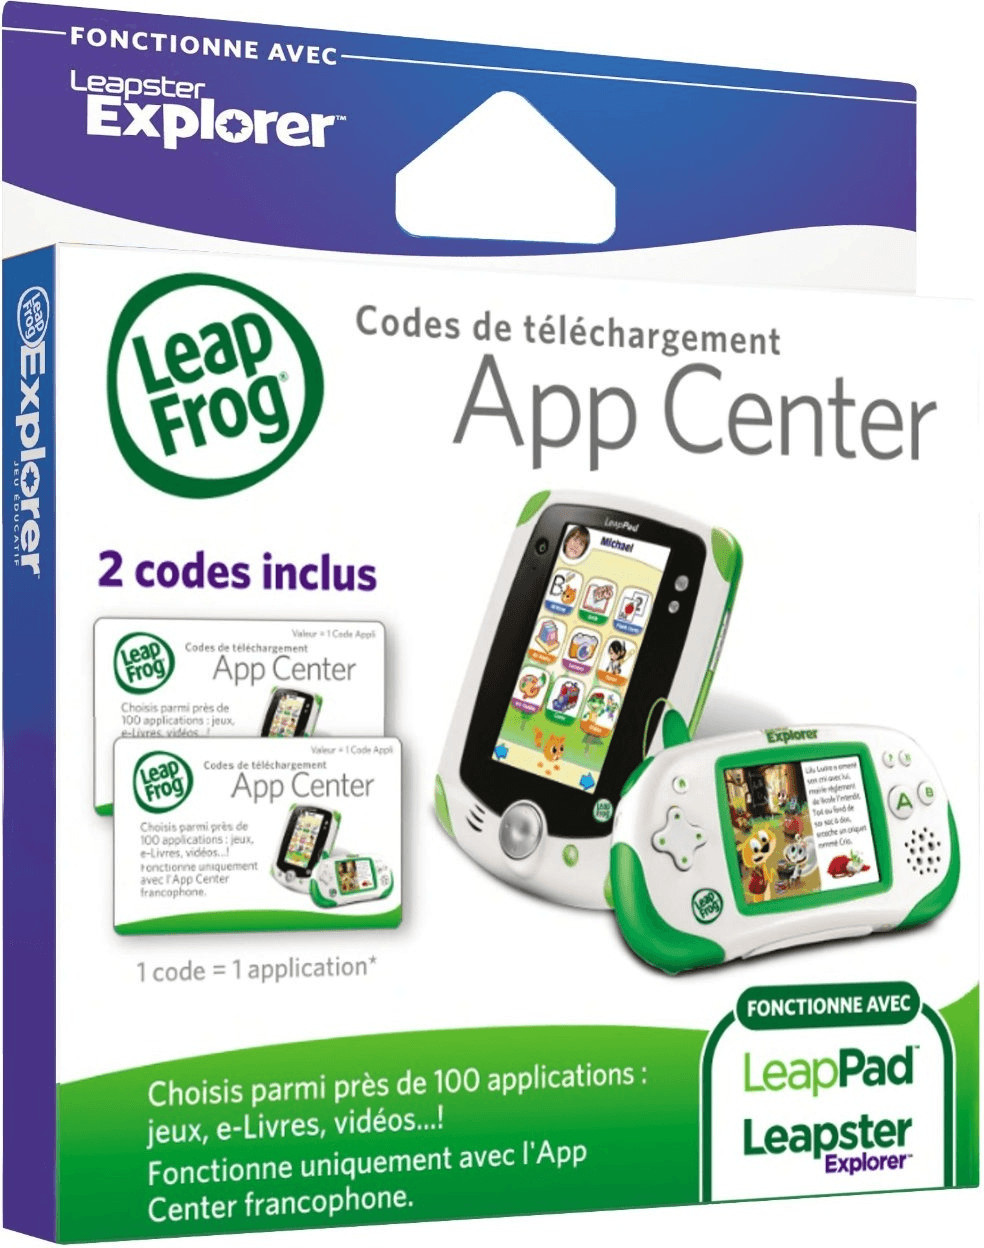 LeapFrog Leapster LeapPad - App Centre Download Card